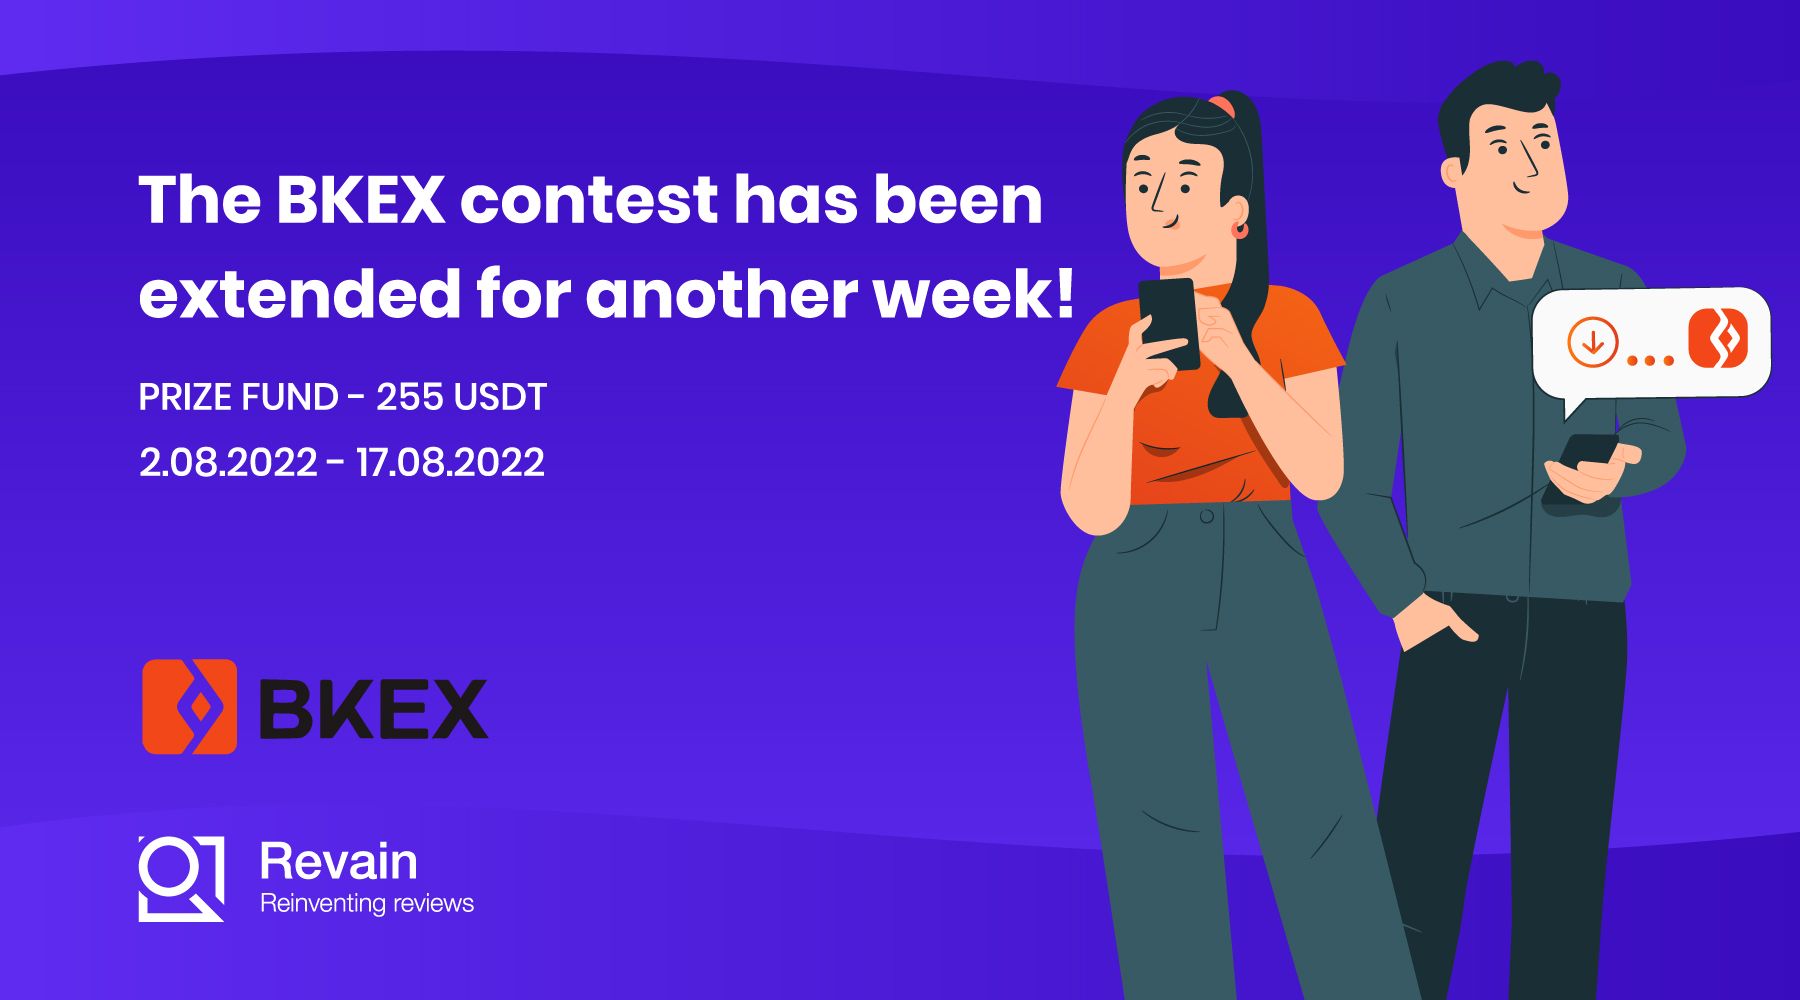 Article The BKEX contest has been extended for another week!